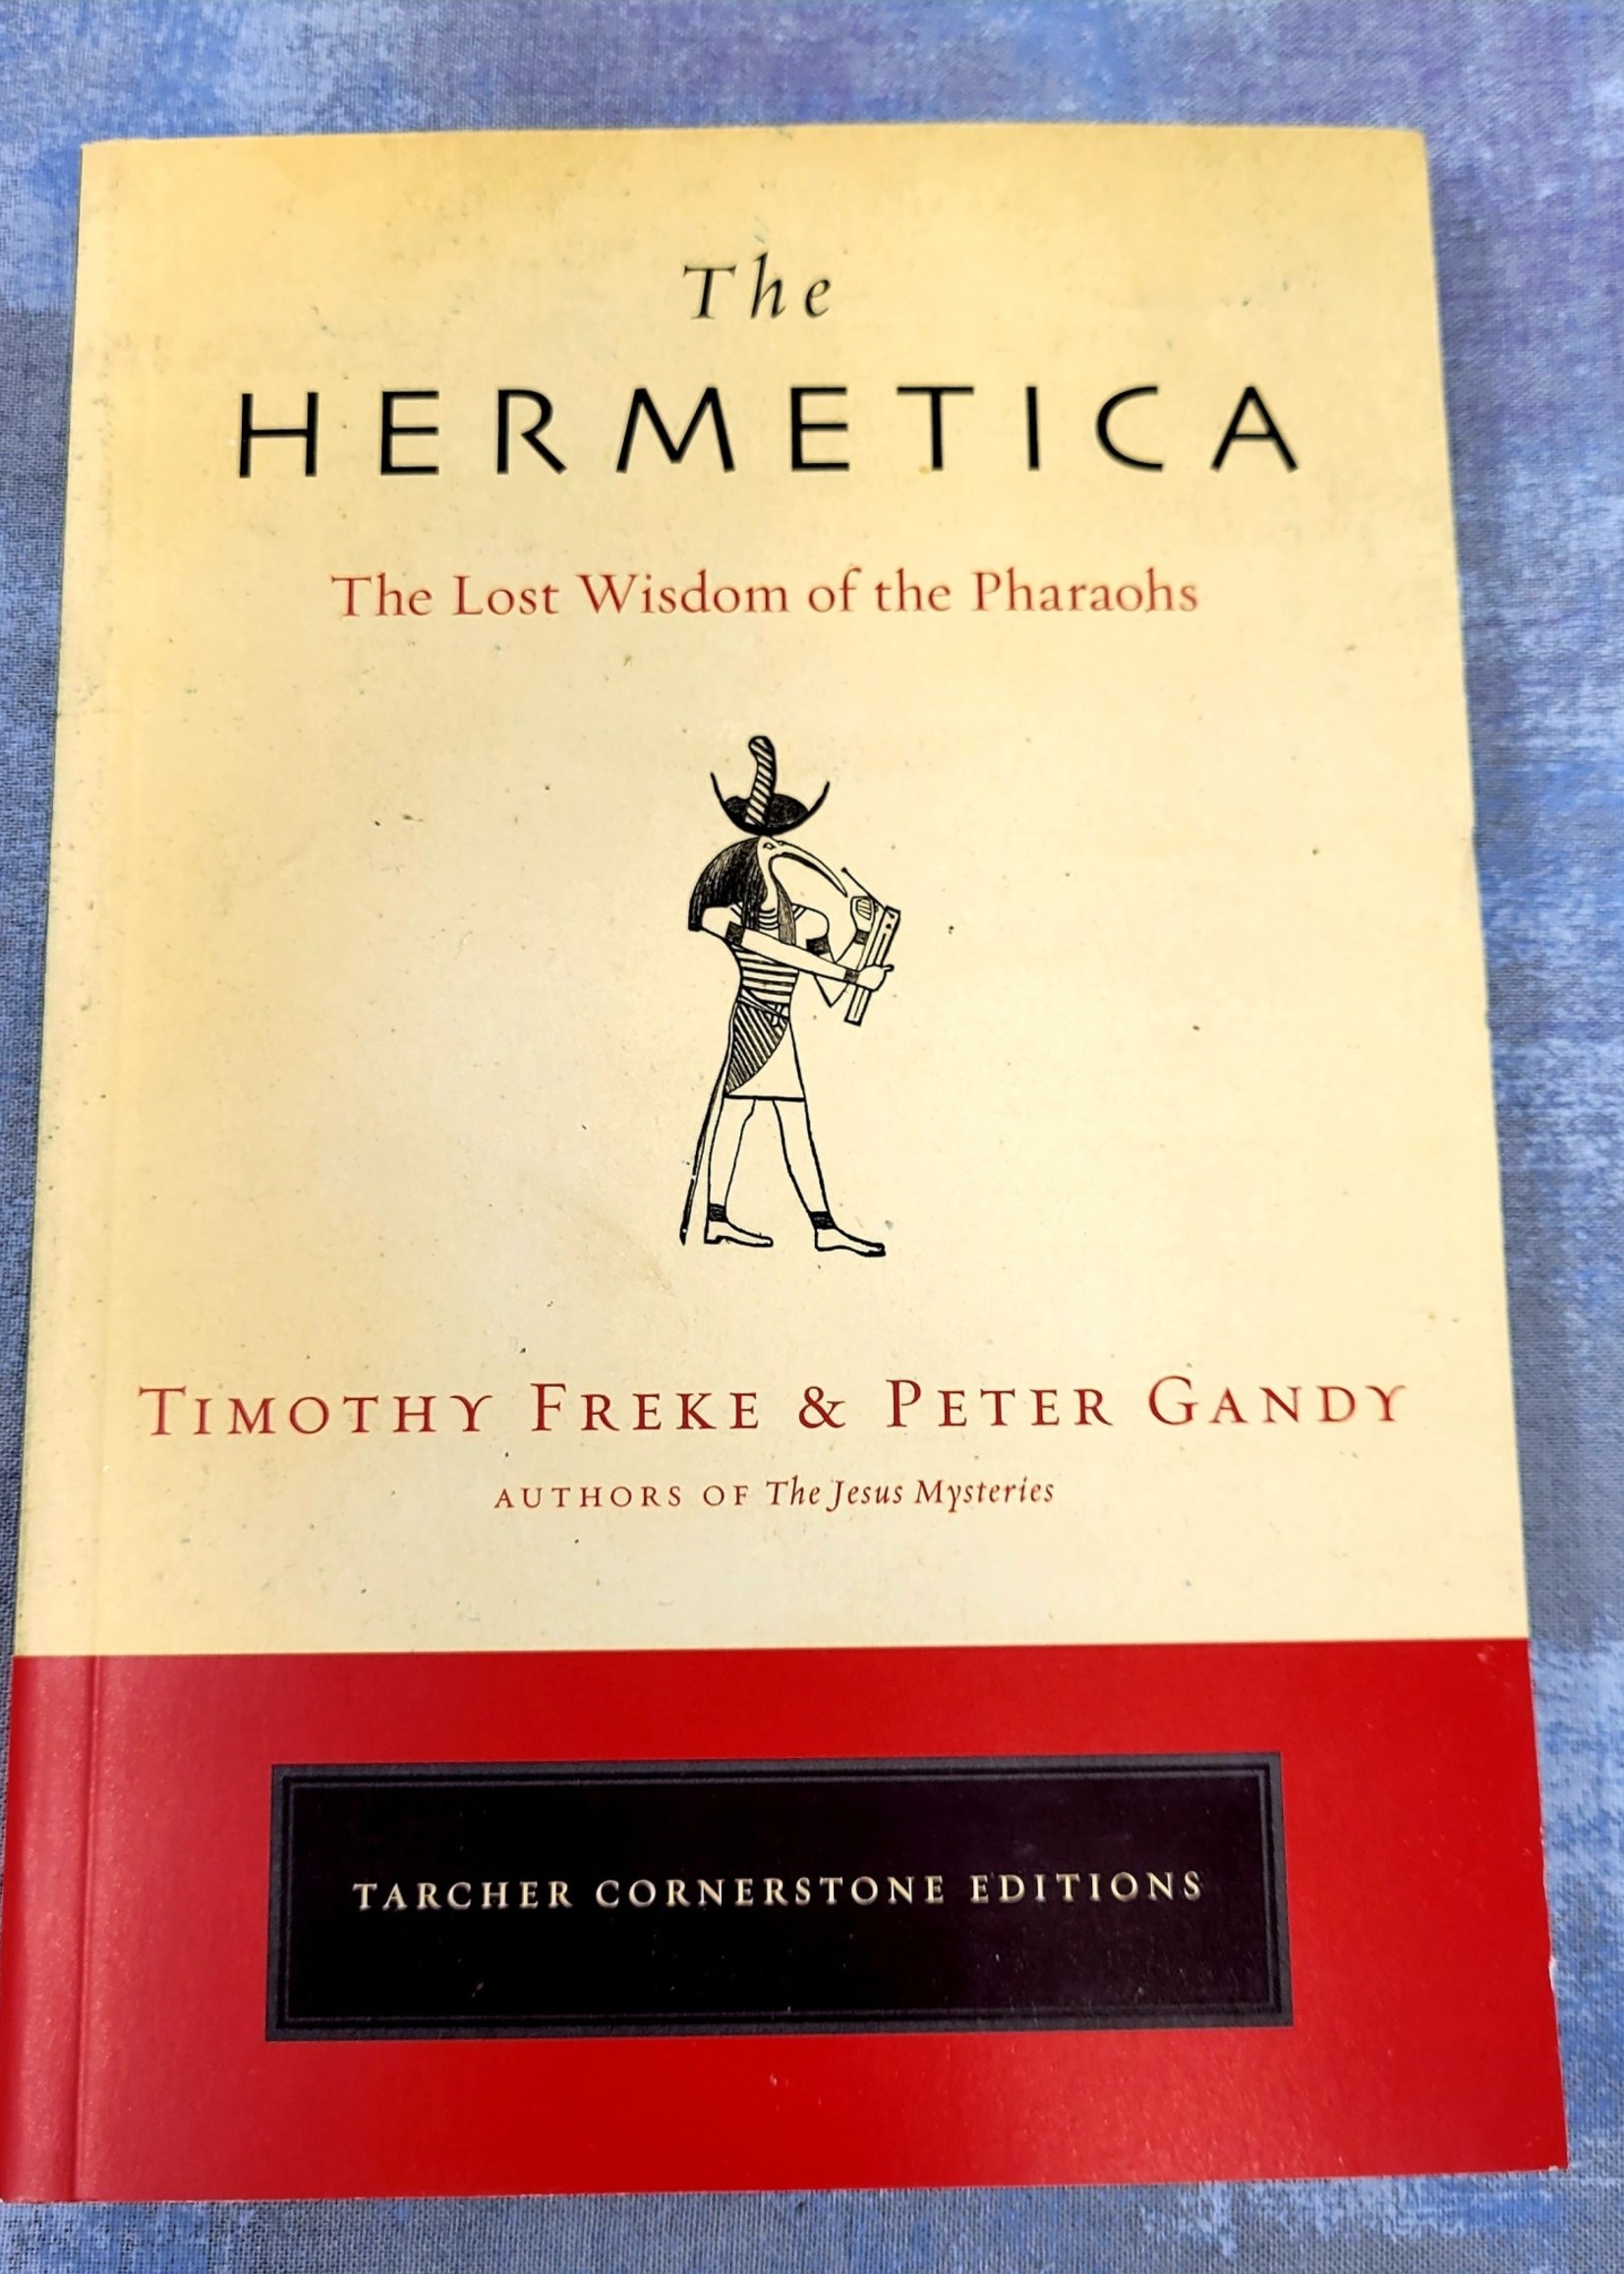 The Hermetica THE LOST WISDOM OF THE PHARAOHS - By Timothy Freke and Peter Gandy